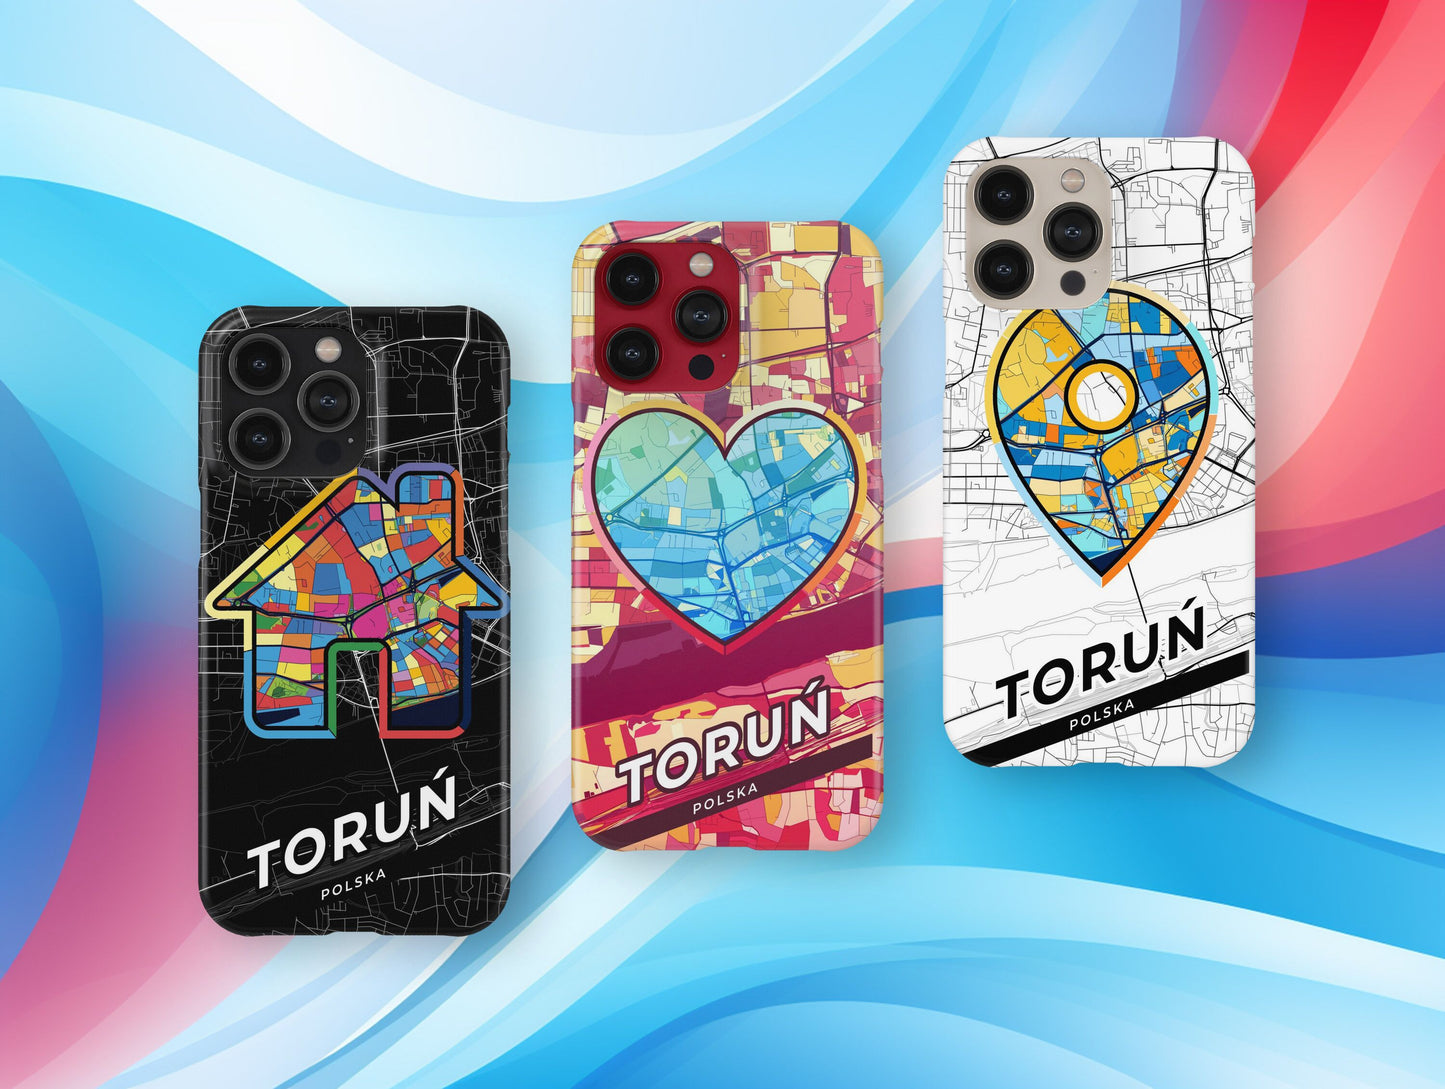 Toruń Poland slim phone case with colorful icon